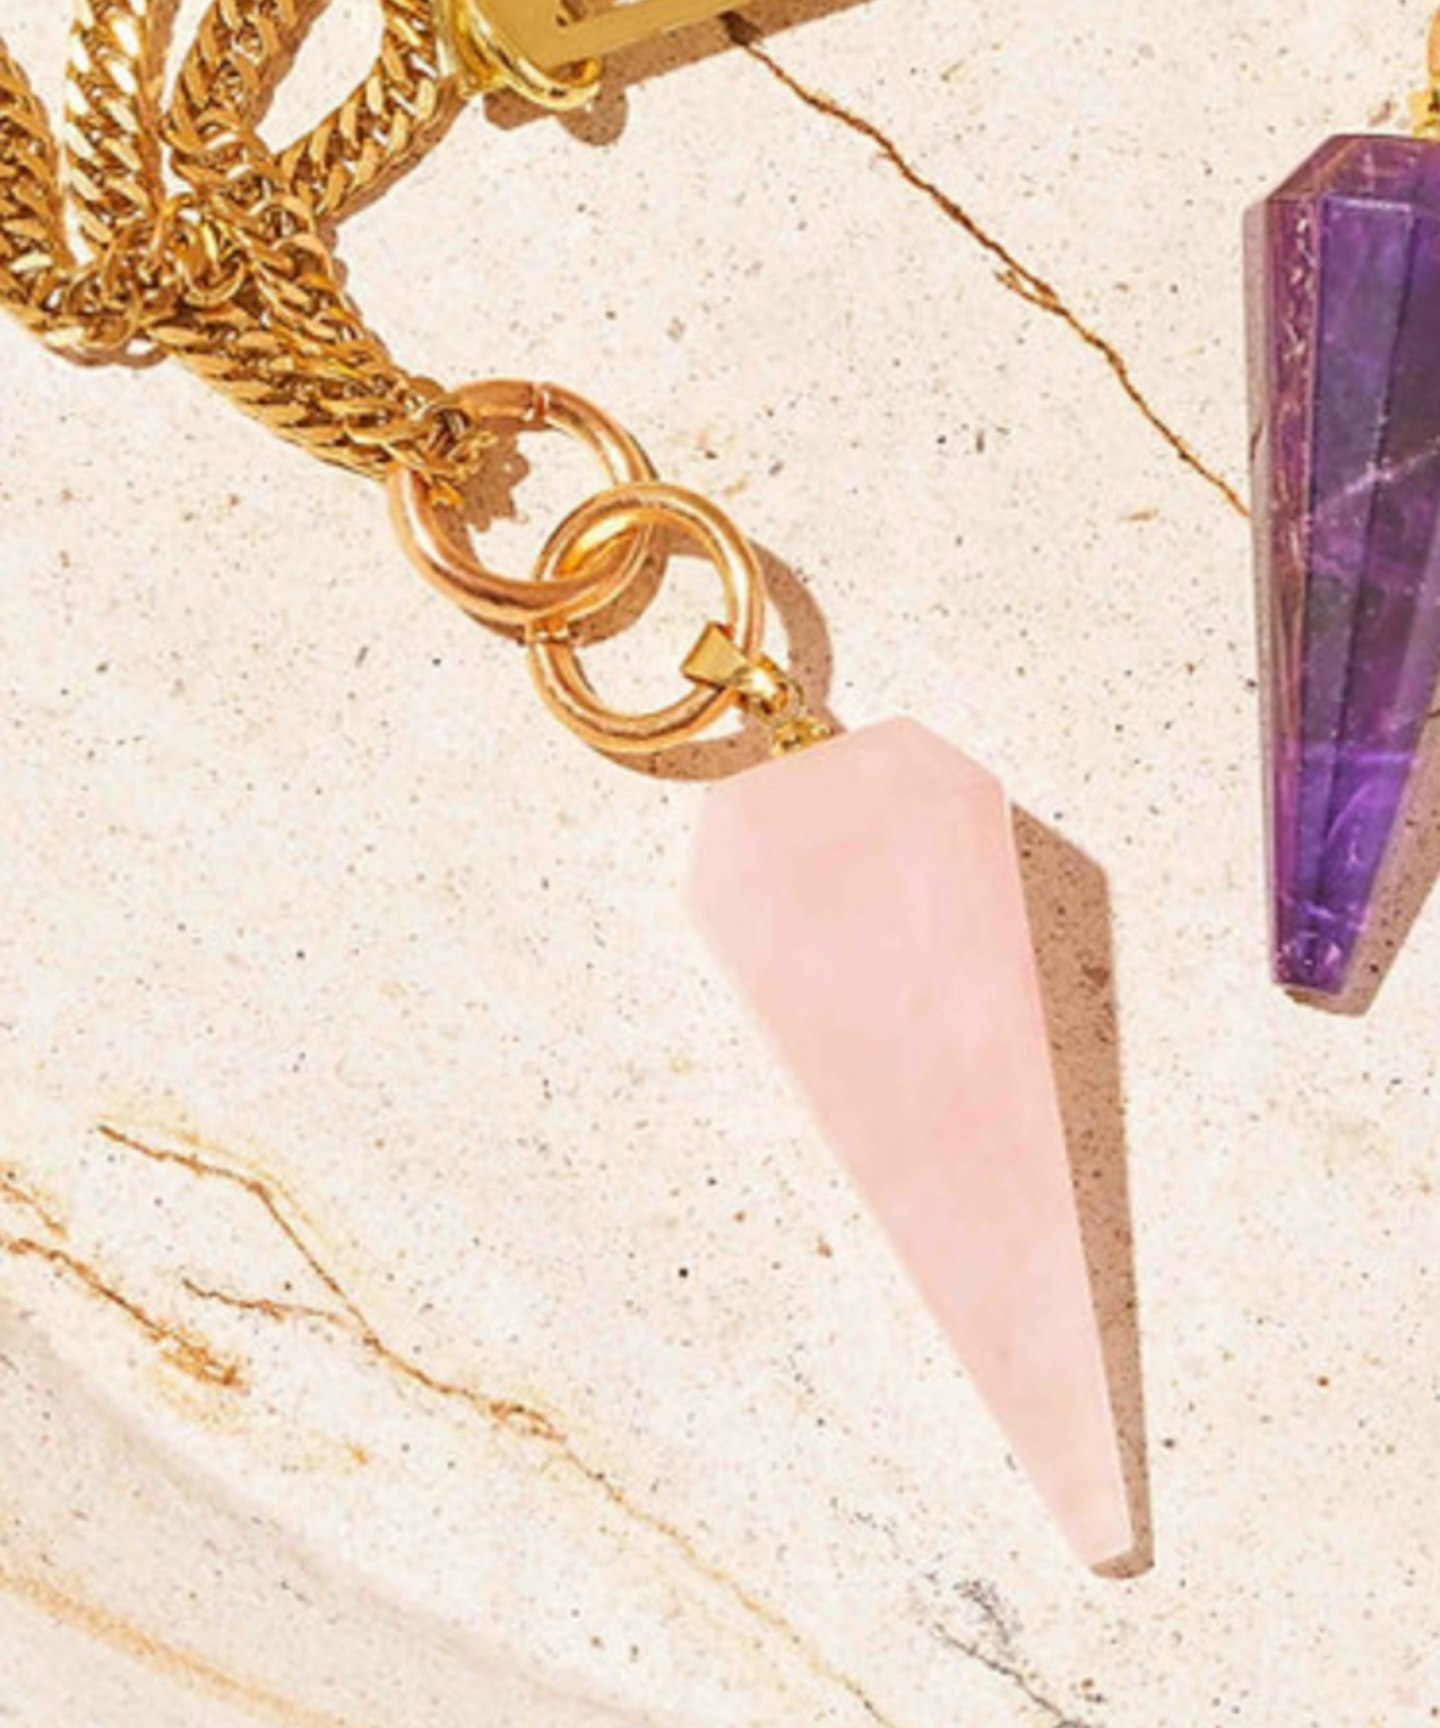 International Women's Day gifts Only Child, Rose Quartz Crystal Pendulum Pendant (Donation to: Young Women's Trust)